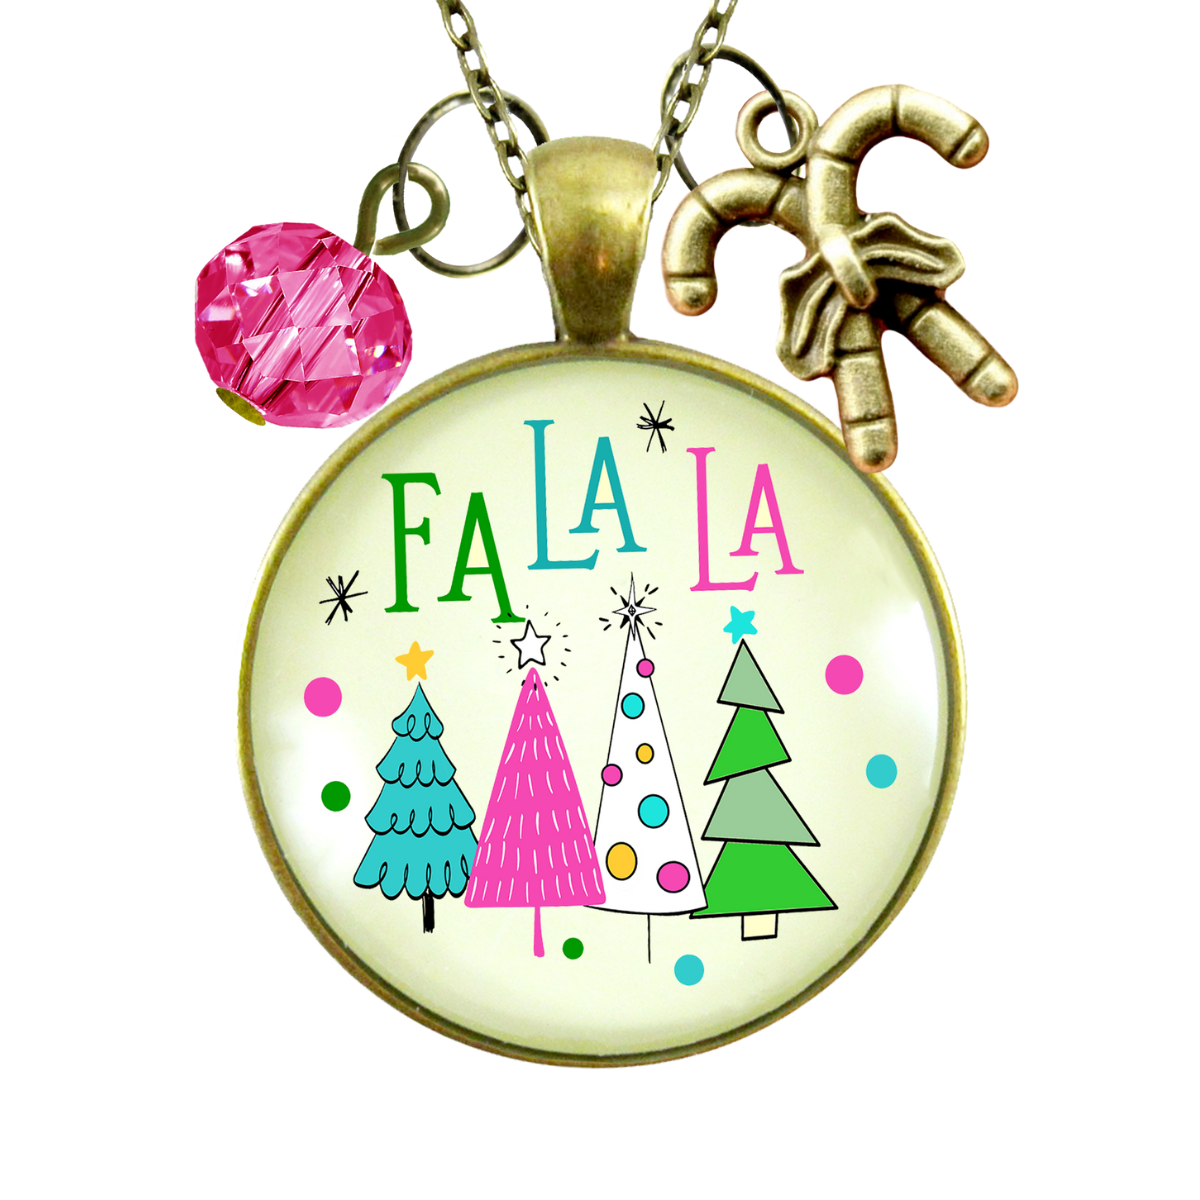 Christmas Candy Cane Charm Necklace Fa La La Pink Holiday Trees Fun Festive Winter Jewelry  Necklace - Gutsy Goodness Handmade Jewelry